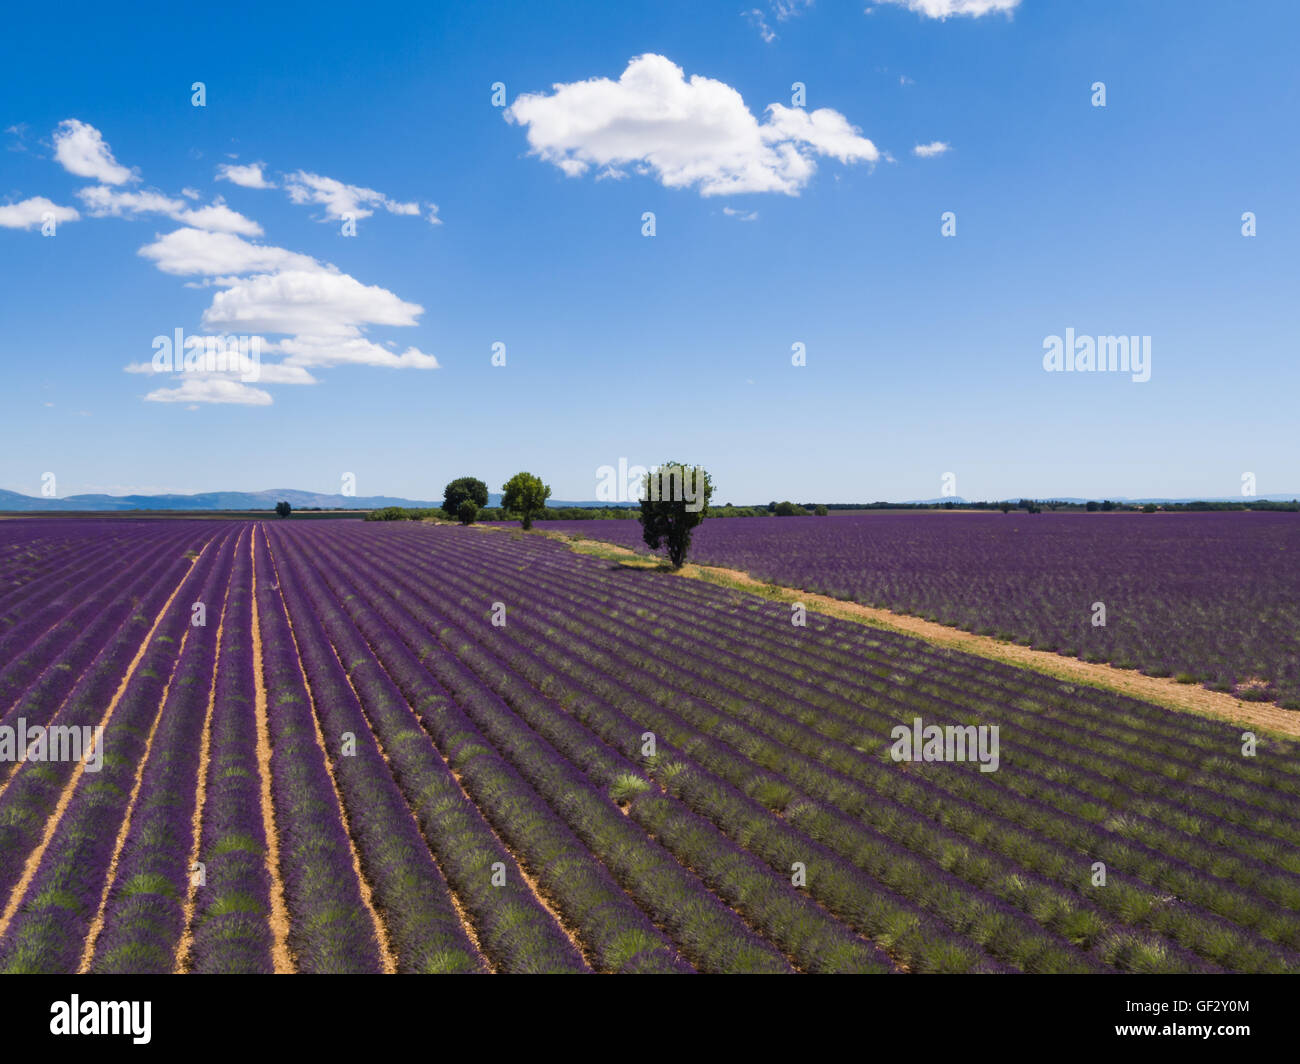 Beautiful landscape of blooming lavender field with sunny sky, lonely trees uphill on horizon. Provence, France, Europe. Stock Photo